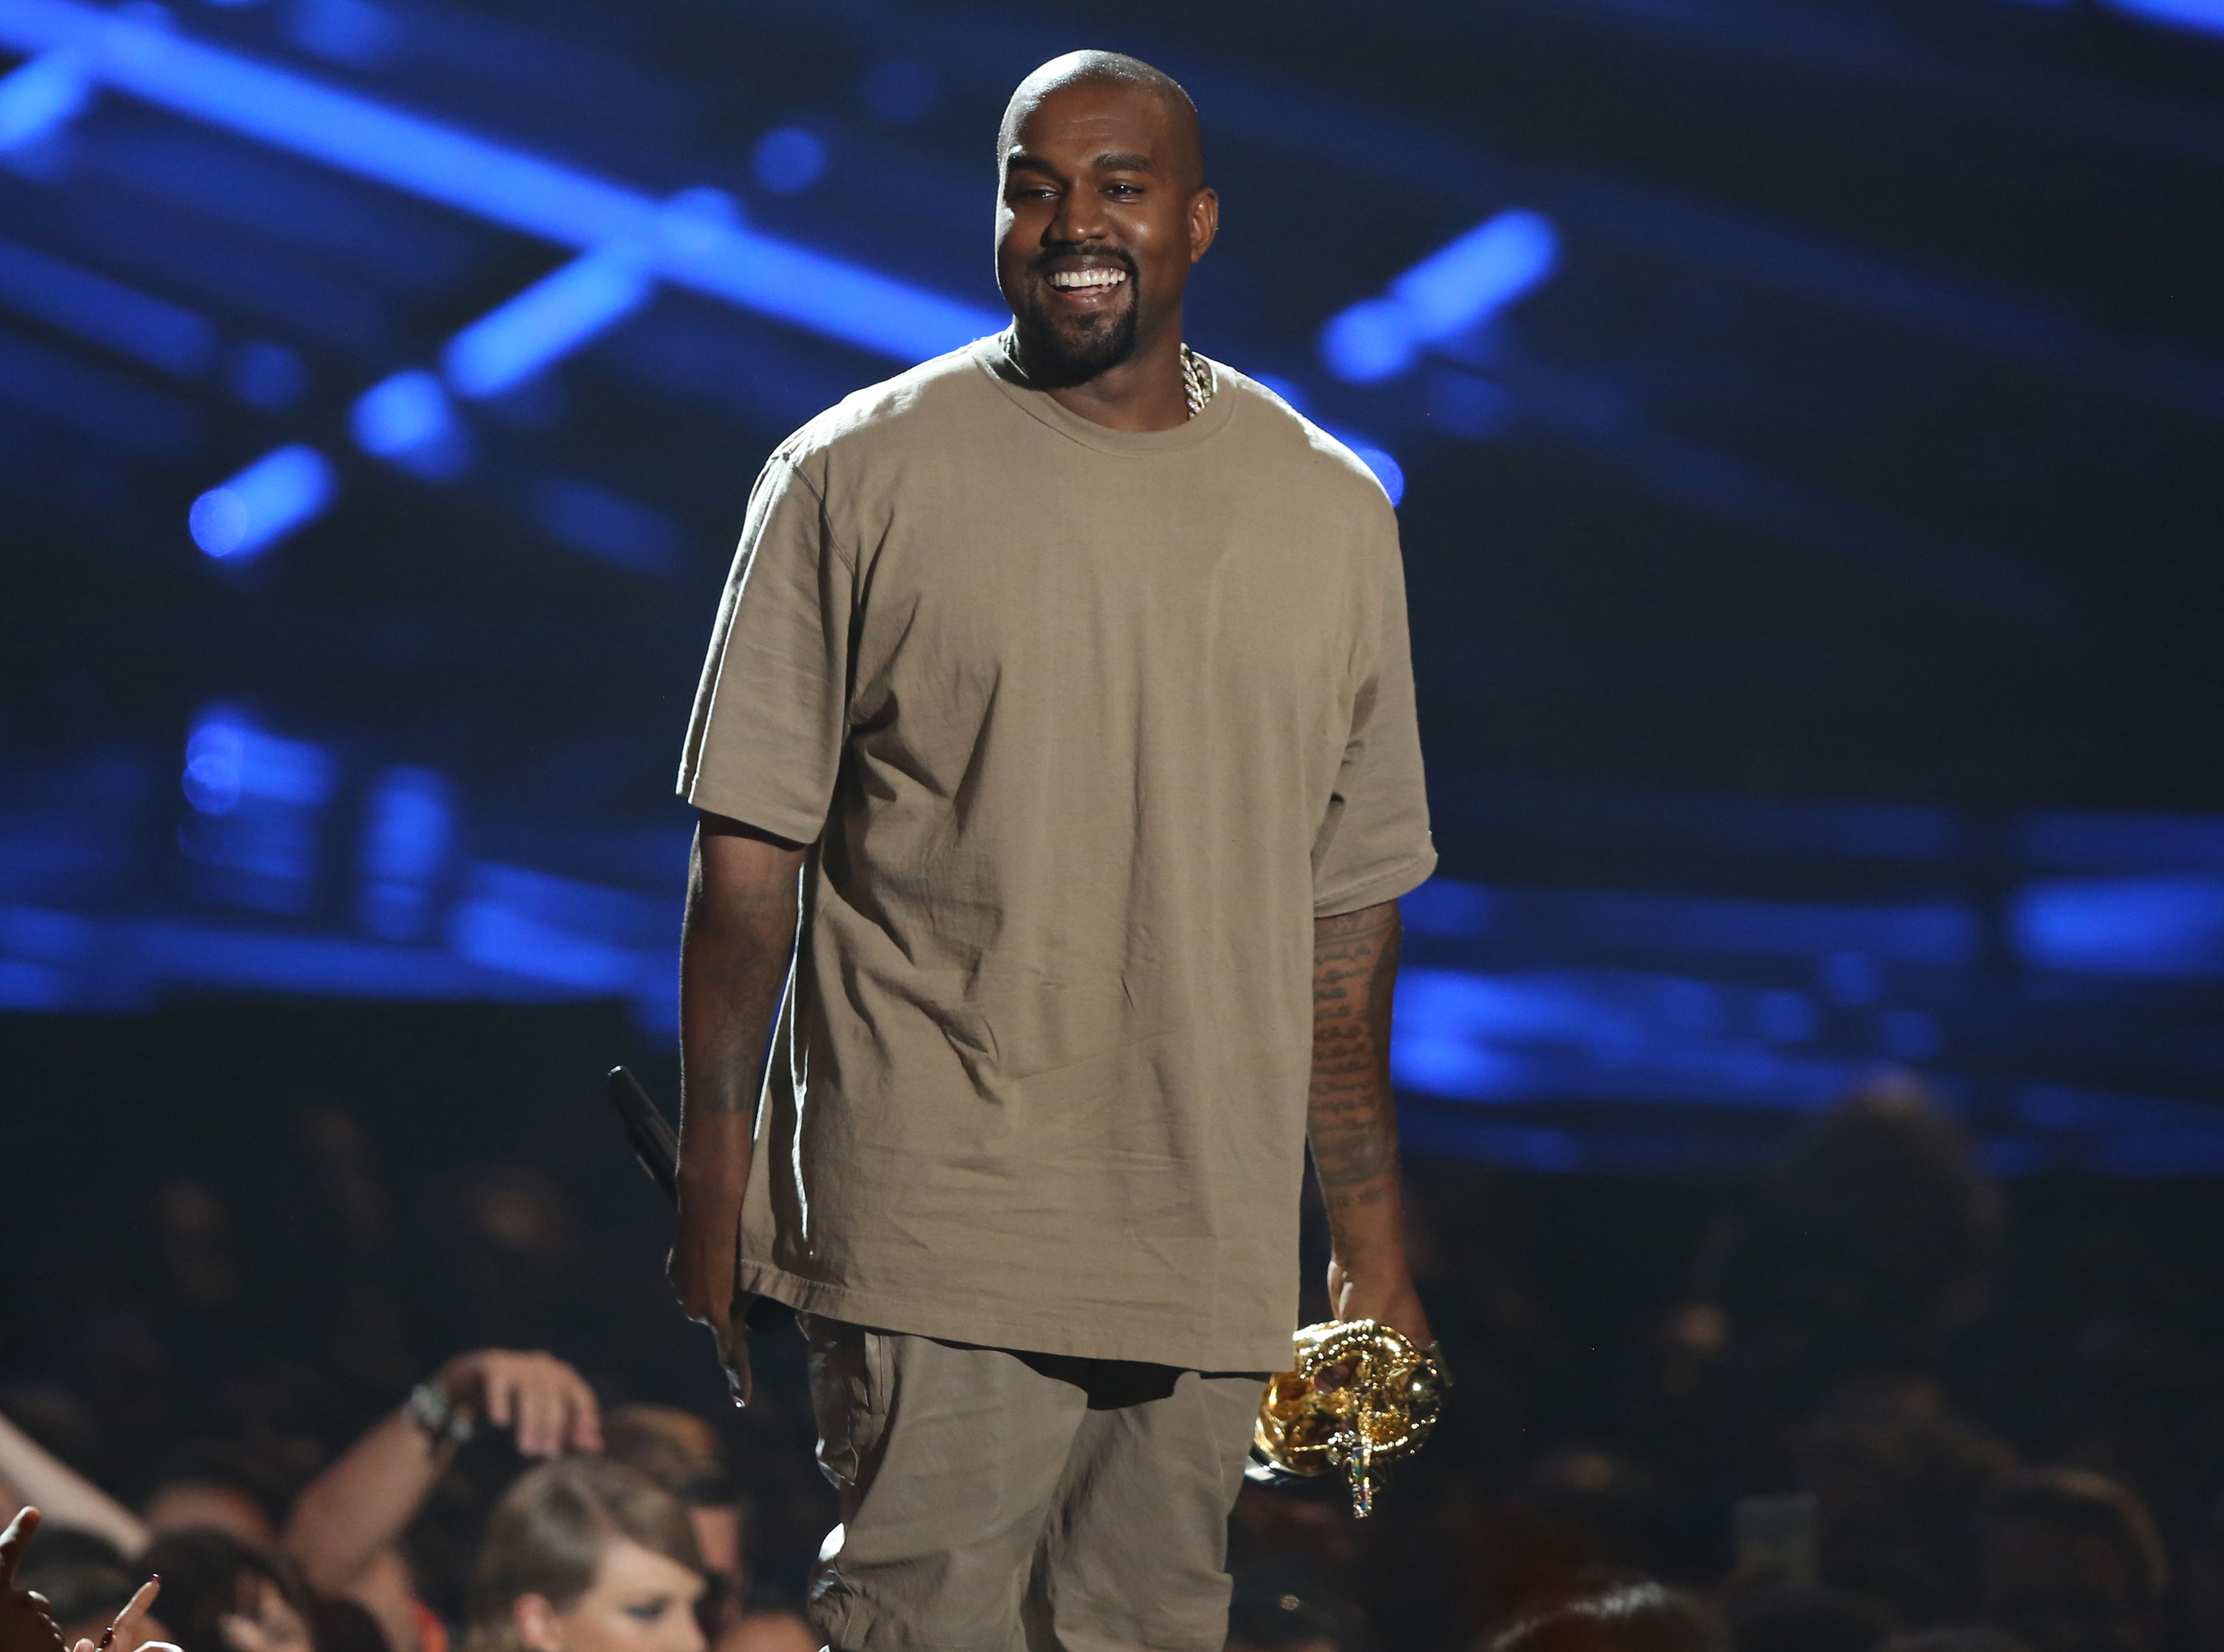 Kanye West accepts the video vanguard award at the MTV Video Music Awards at the Microsoft Theater on Aug. 30, 2015, in Los Angeles. (Matt Sayles—Invision/AP)